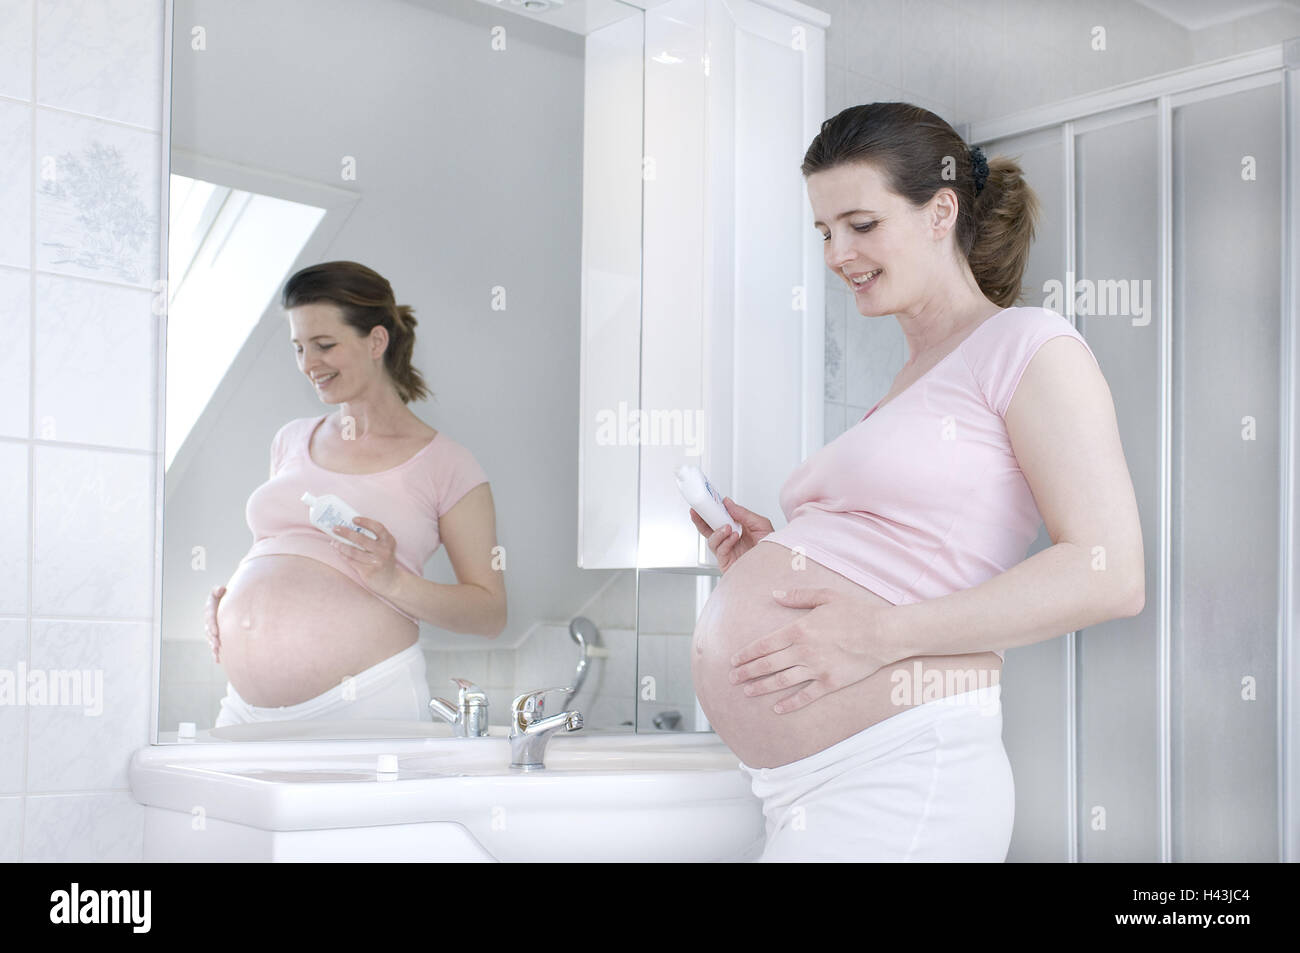 Woman, young, pregnant, bathrooms, stand, lubricate abdomen, side view, model released, Stock Photo